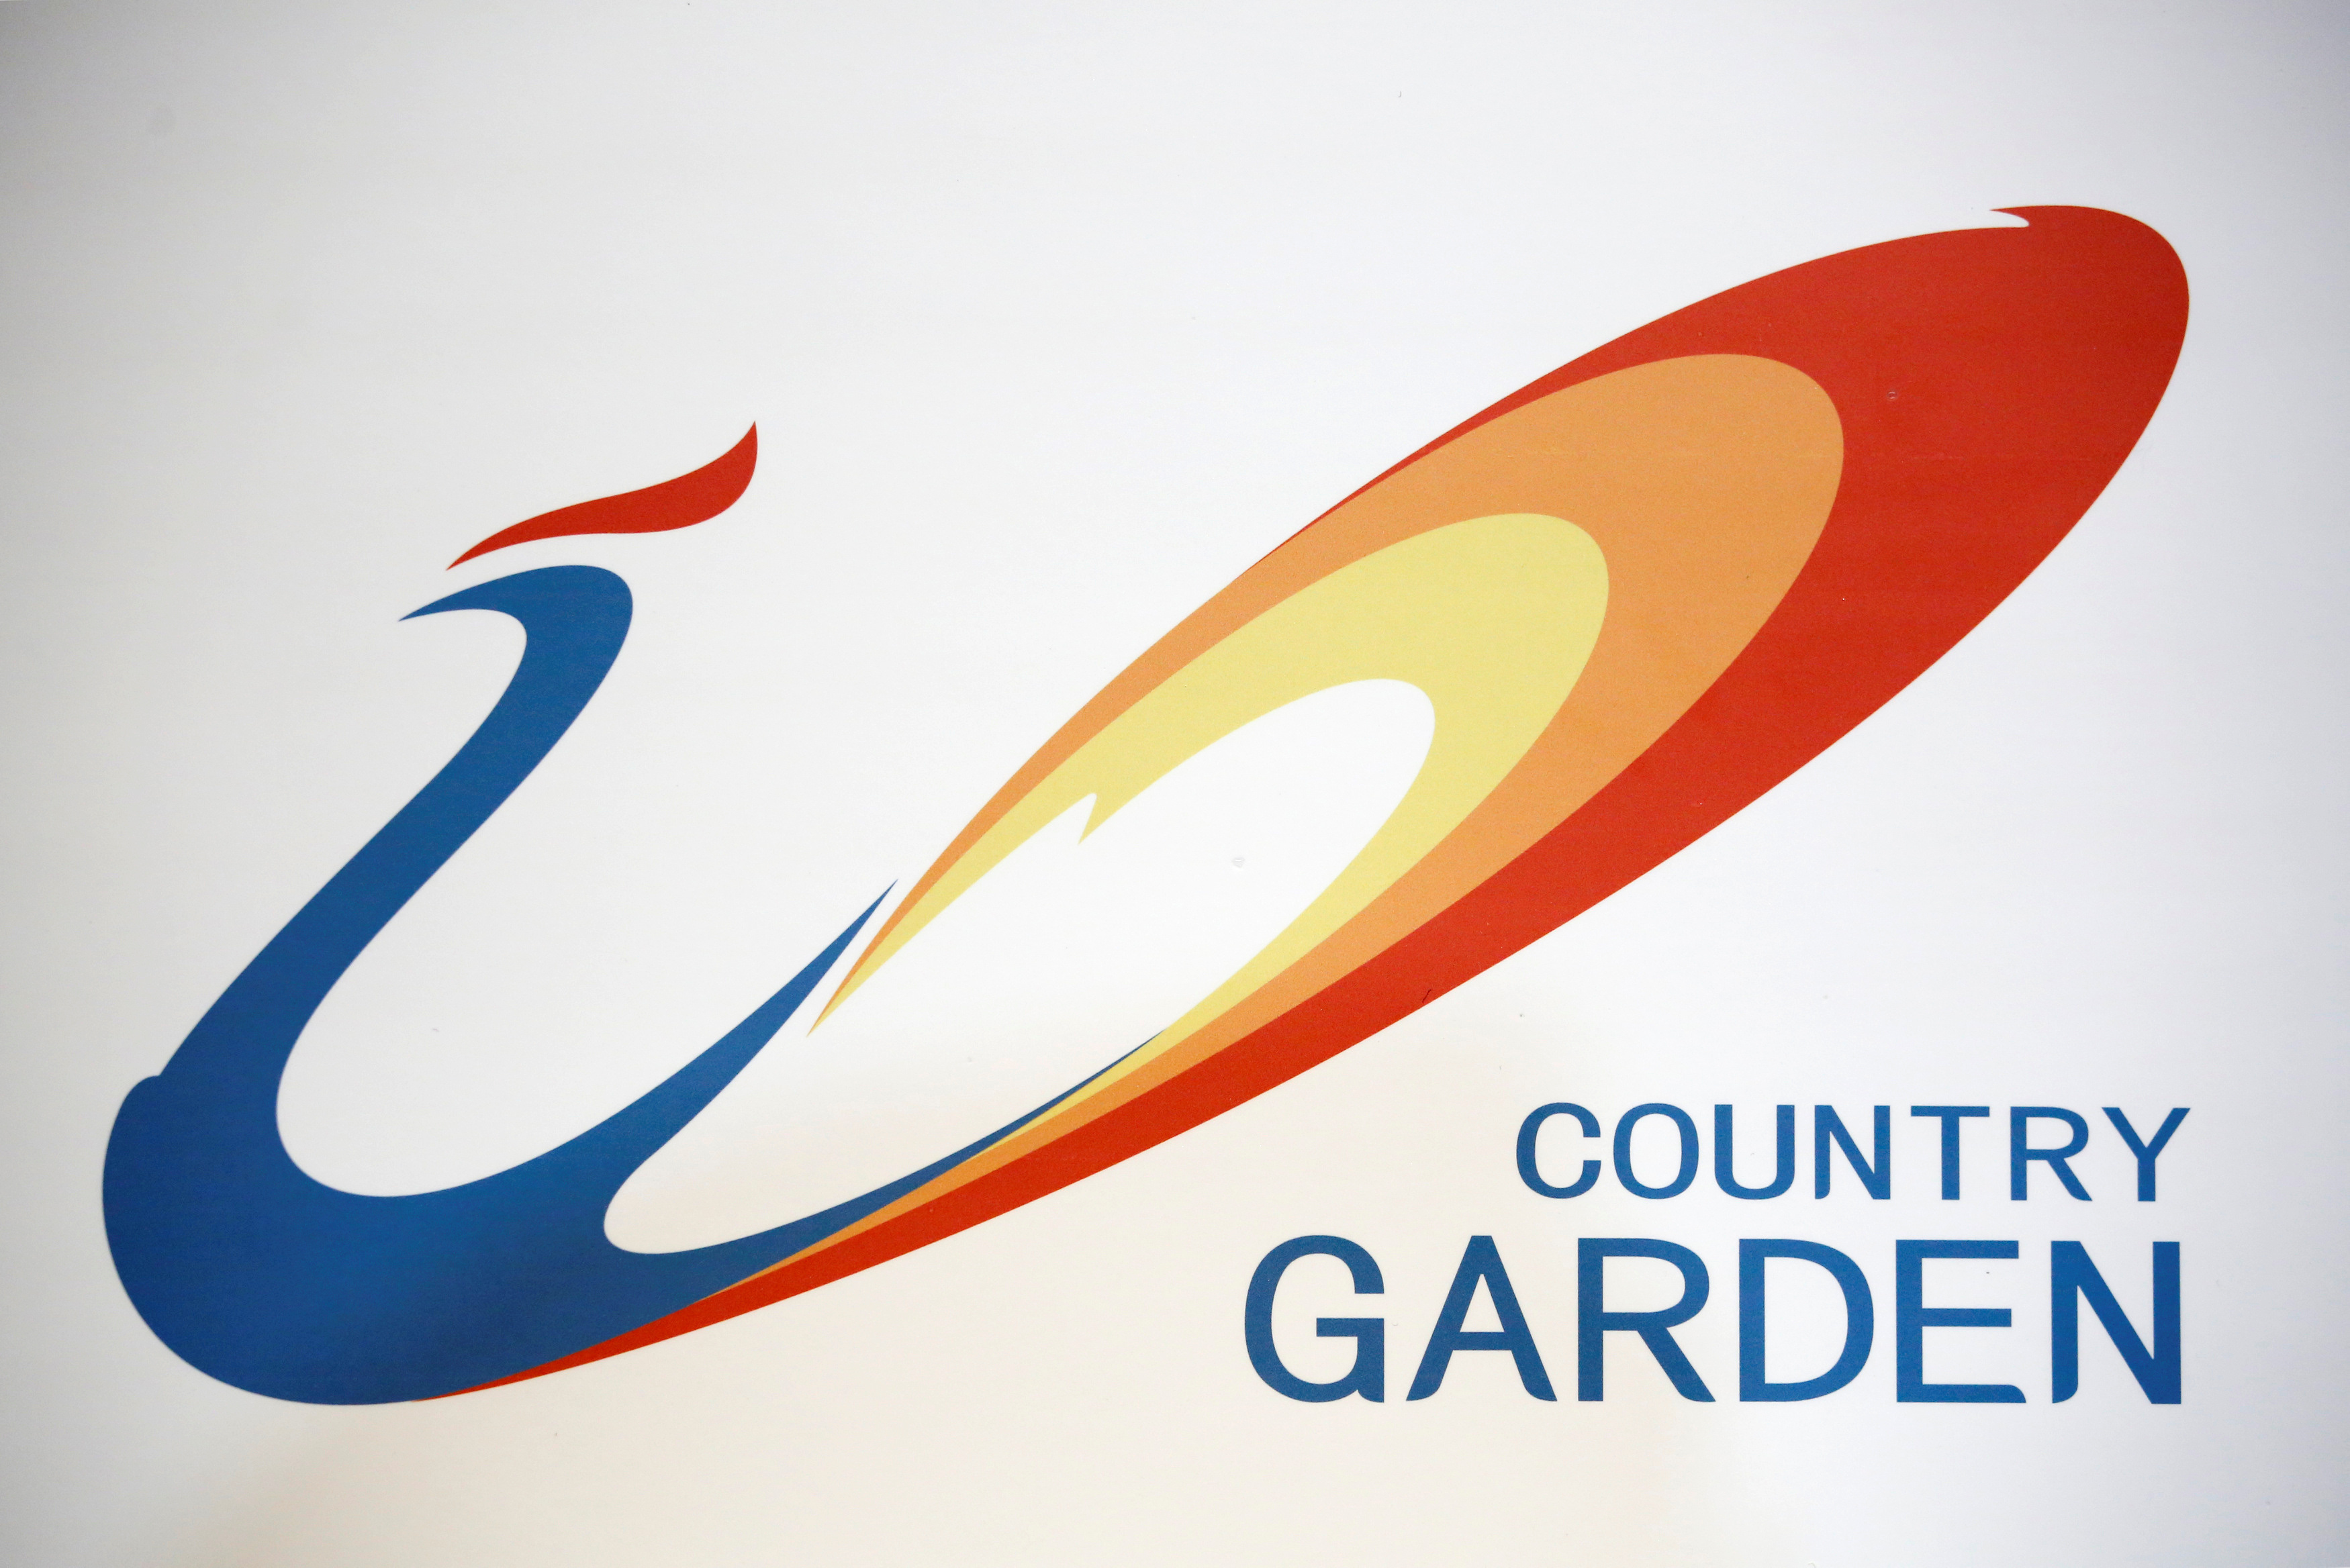 The company logo of Chinese developer Country Garden is displayed at a news conference in Hong Kong